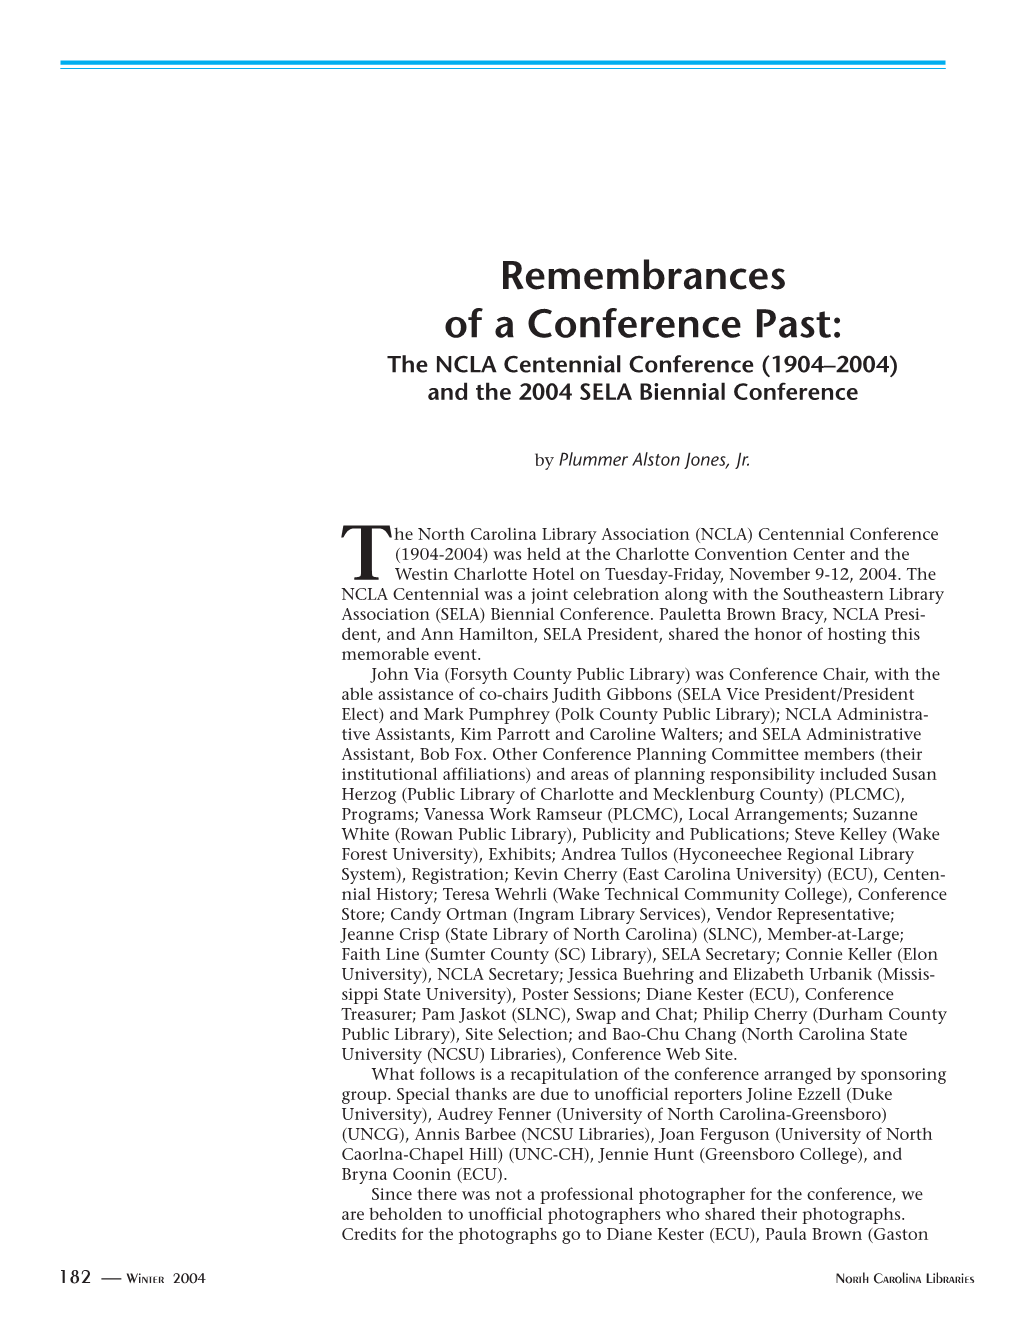 Remembrances of a Conference Past: the NCLA Centennial Conference (1904–2004) and the 2004 SELA Biennial Conference